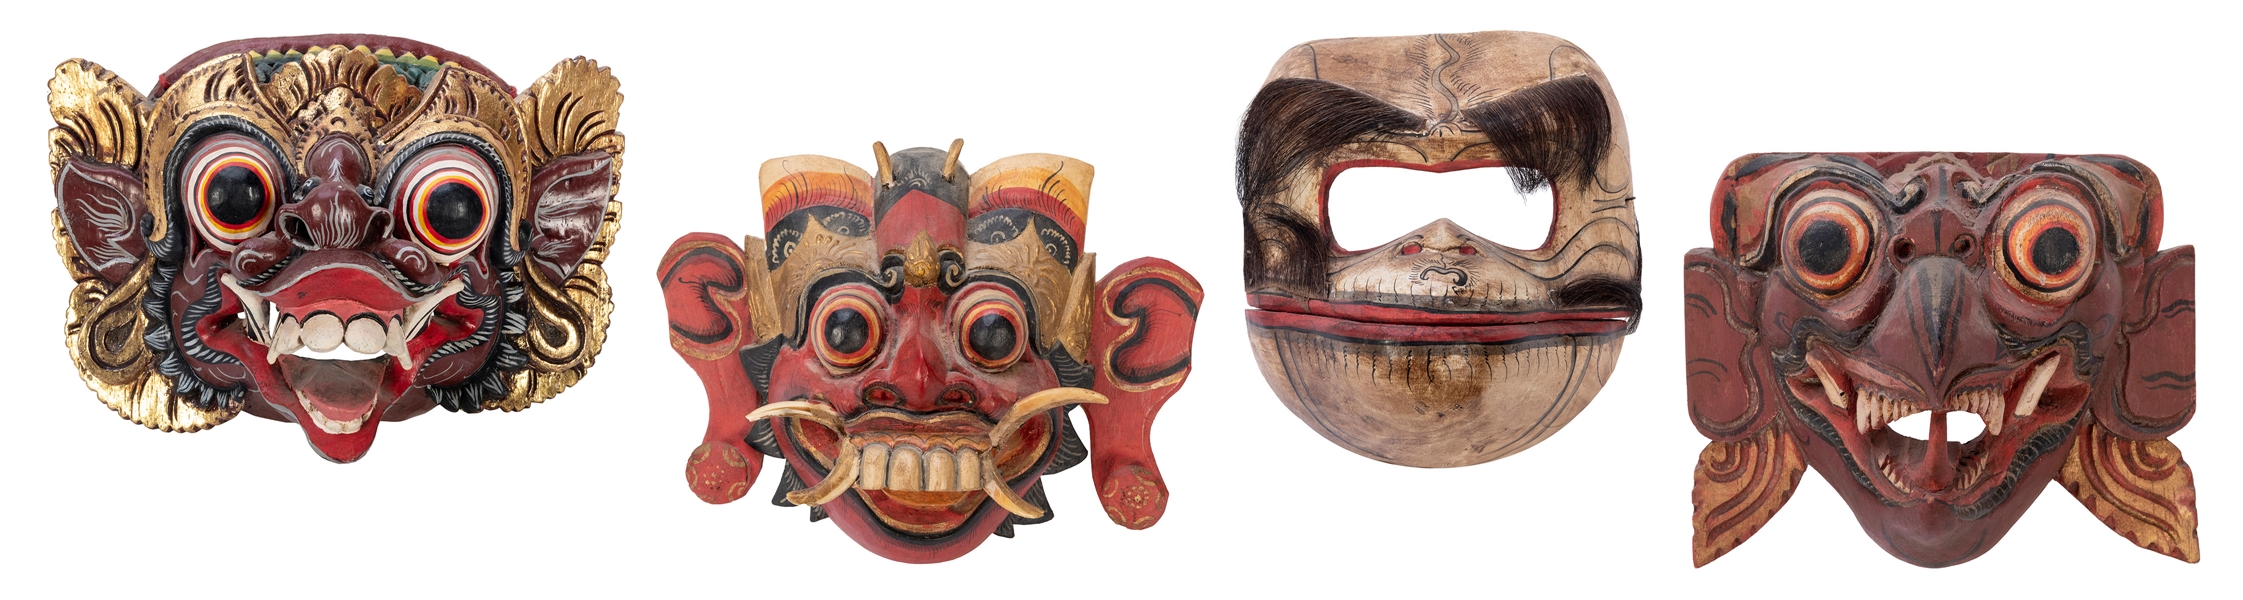  Four Wooden Indonesian Masks. Hand painted, one with articu...